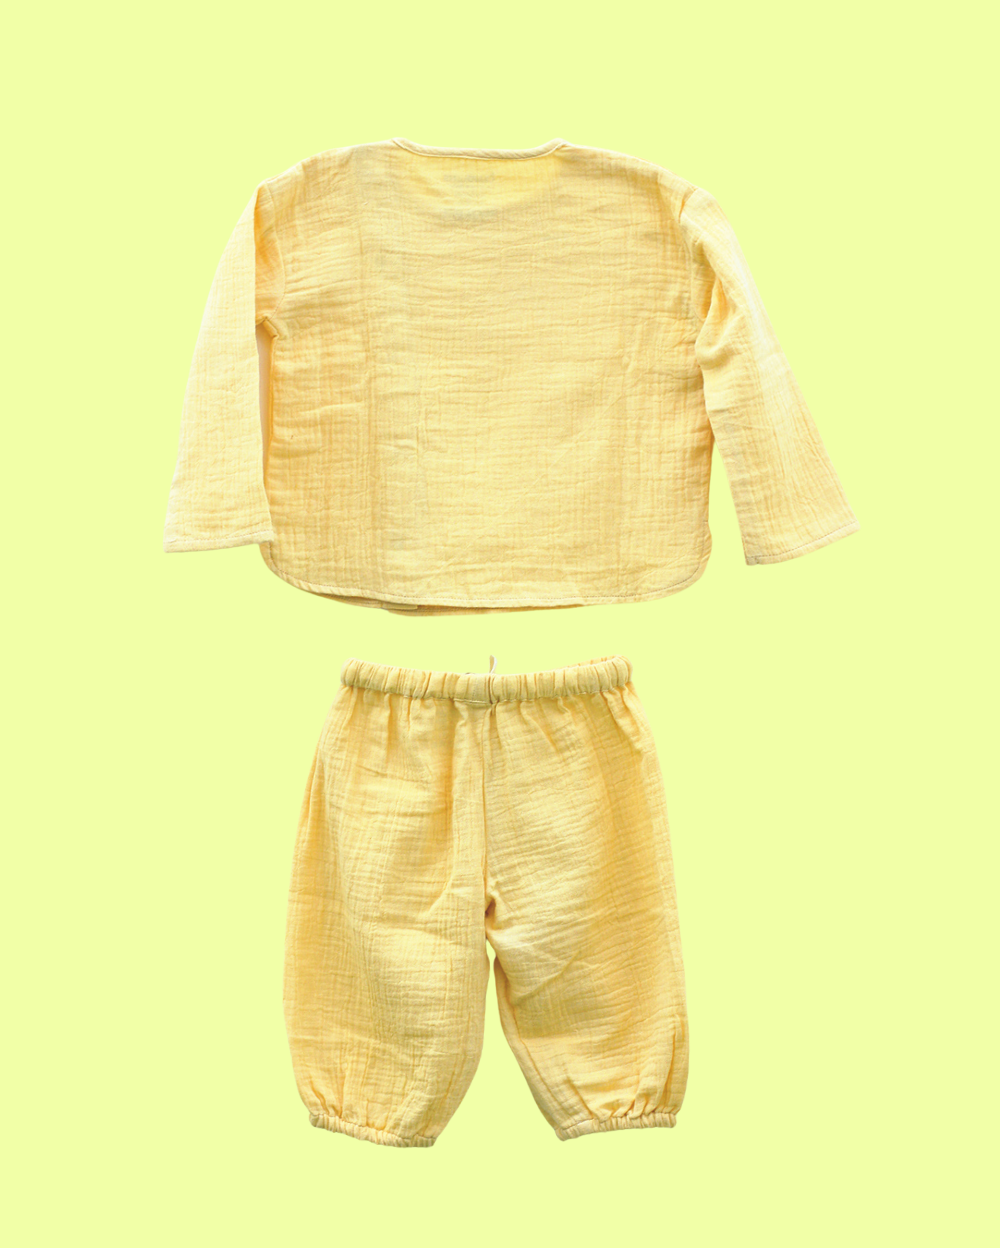 100% Natural Double Cotton Onesie & Baby Set for Baby Girl - 2 Piece Set